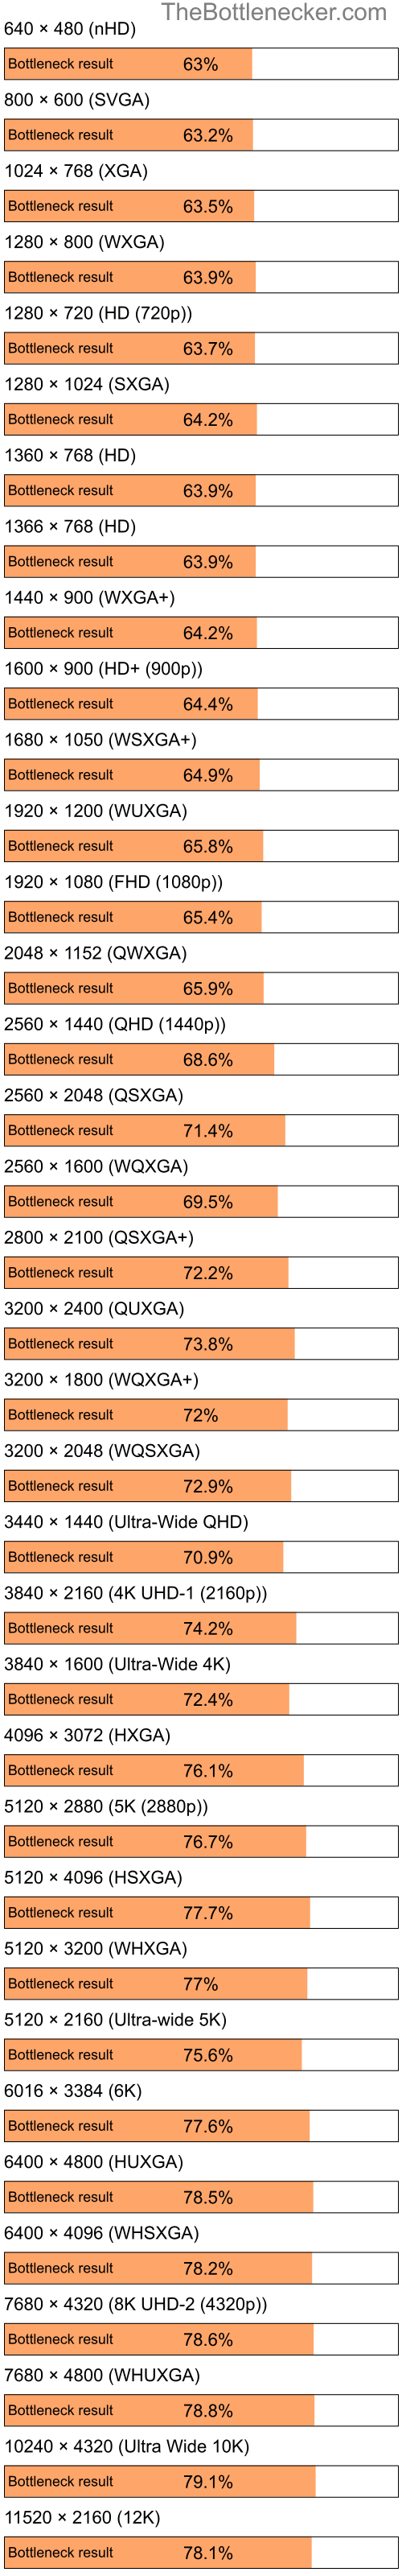 Bottleneck results by resolution for Intel Celeron and NVIDIA Quadro FX 540 in General Tasks